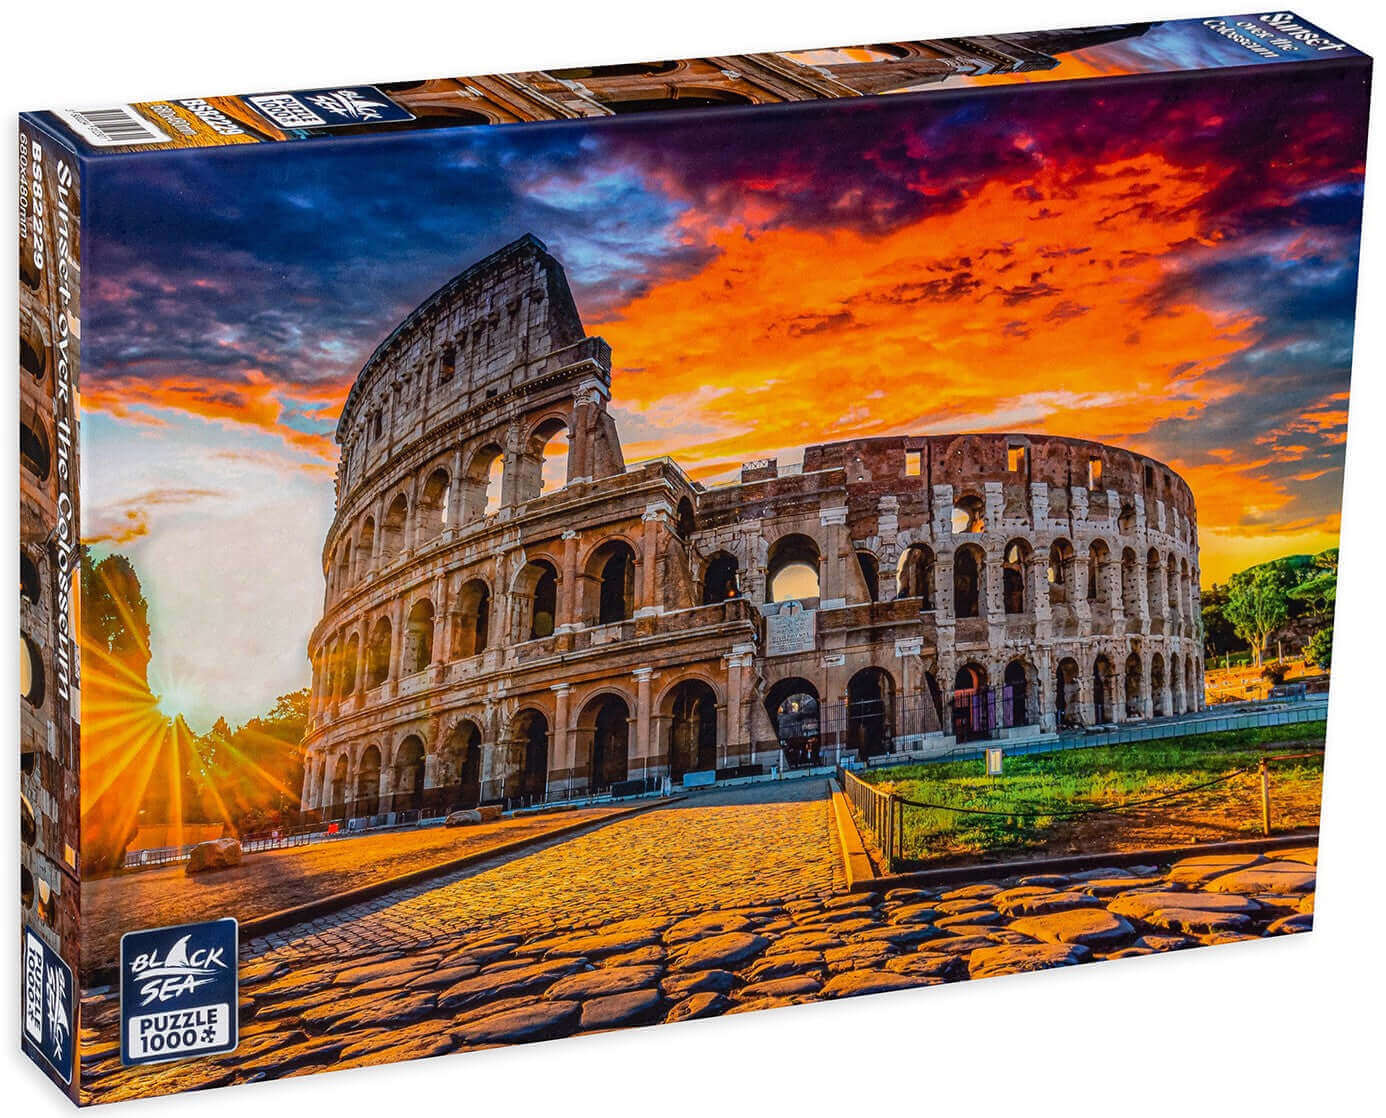 Puzzle Black Sea 1000 pieces - Sunset over the Colosseum